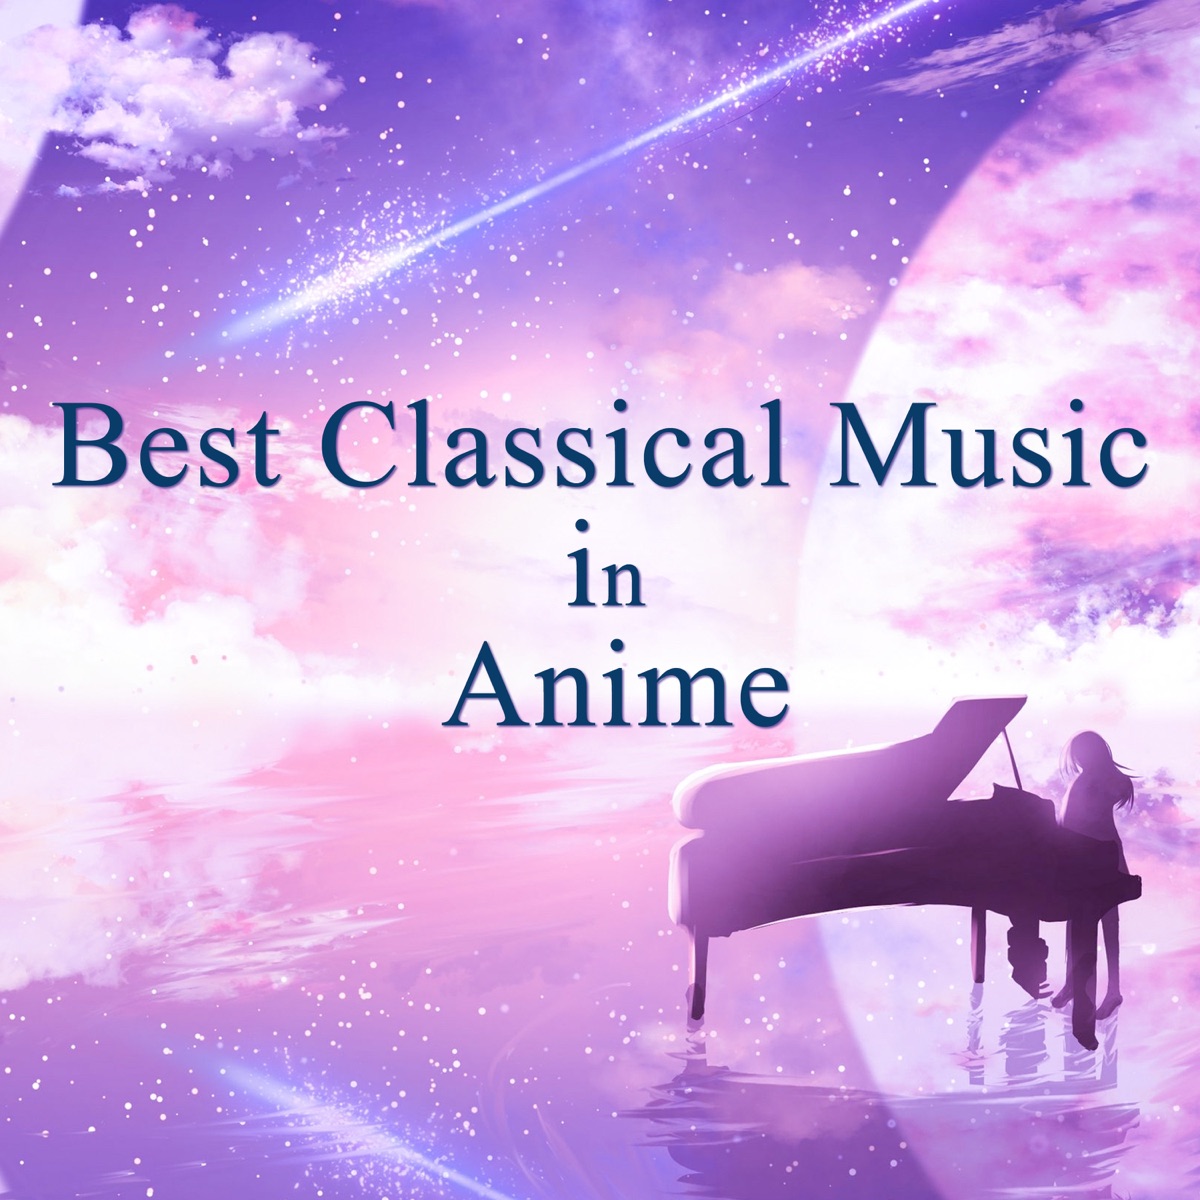 25 Best Anime Songs  All The Top Openings  Music Industry How To